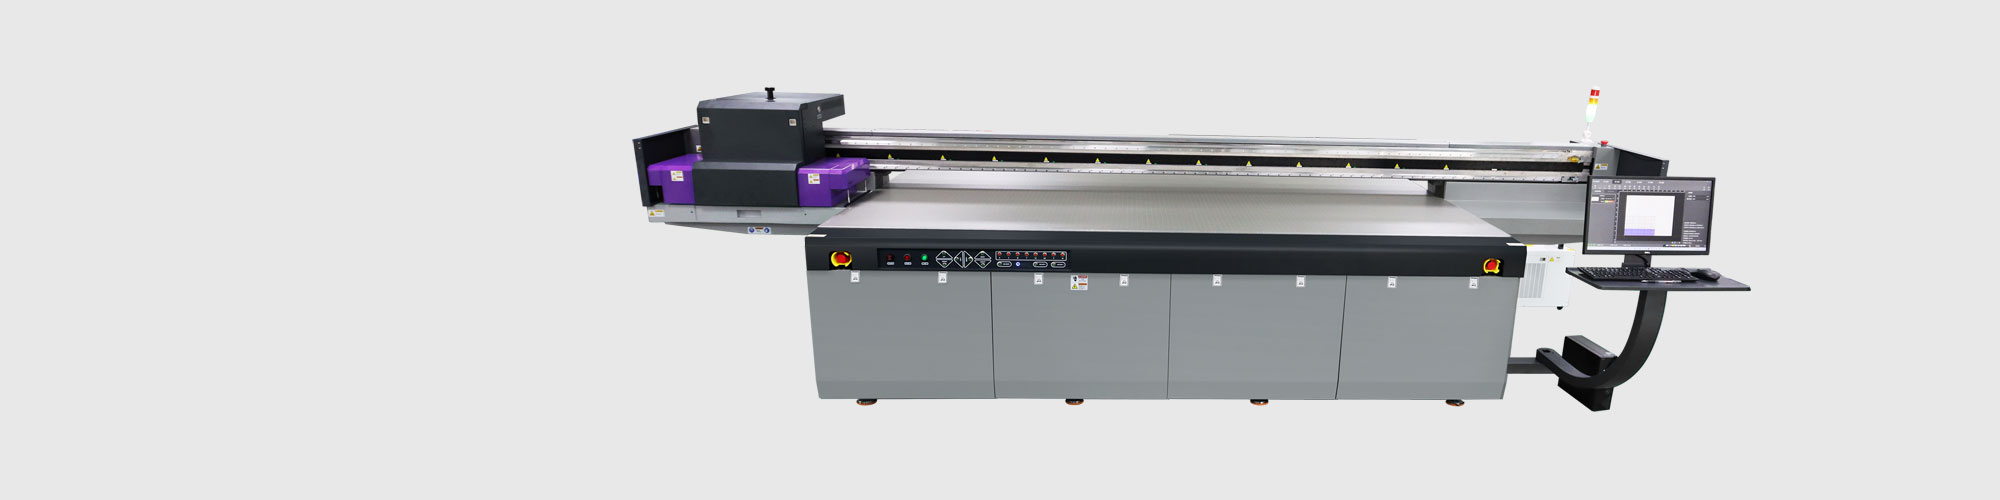 UV Flatbed Printer: Applications in Custom Printing and Personalization